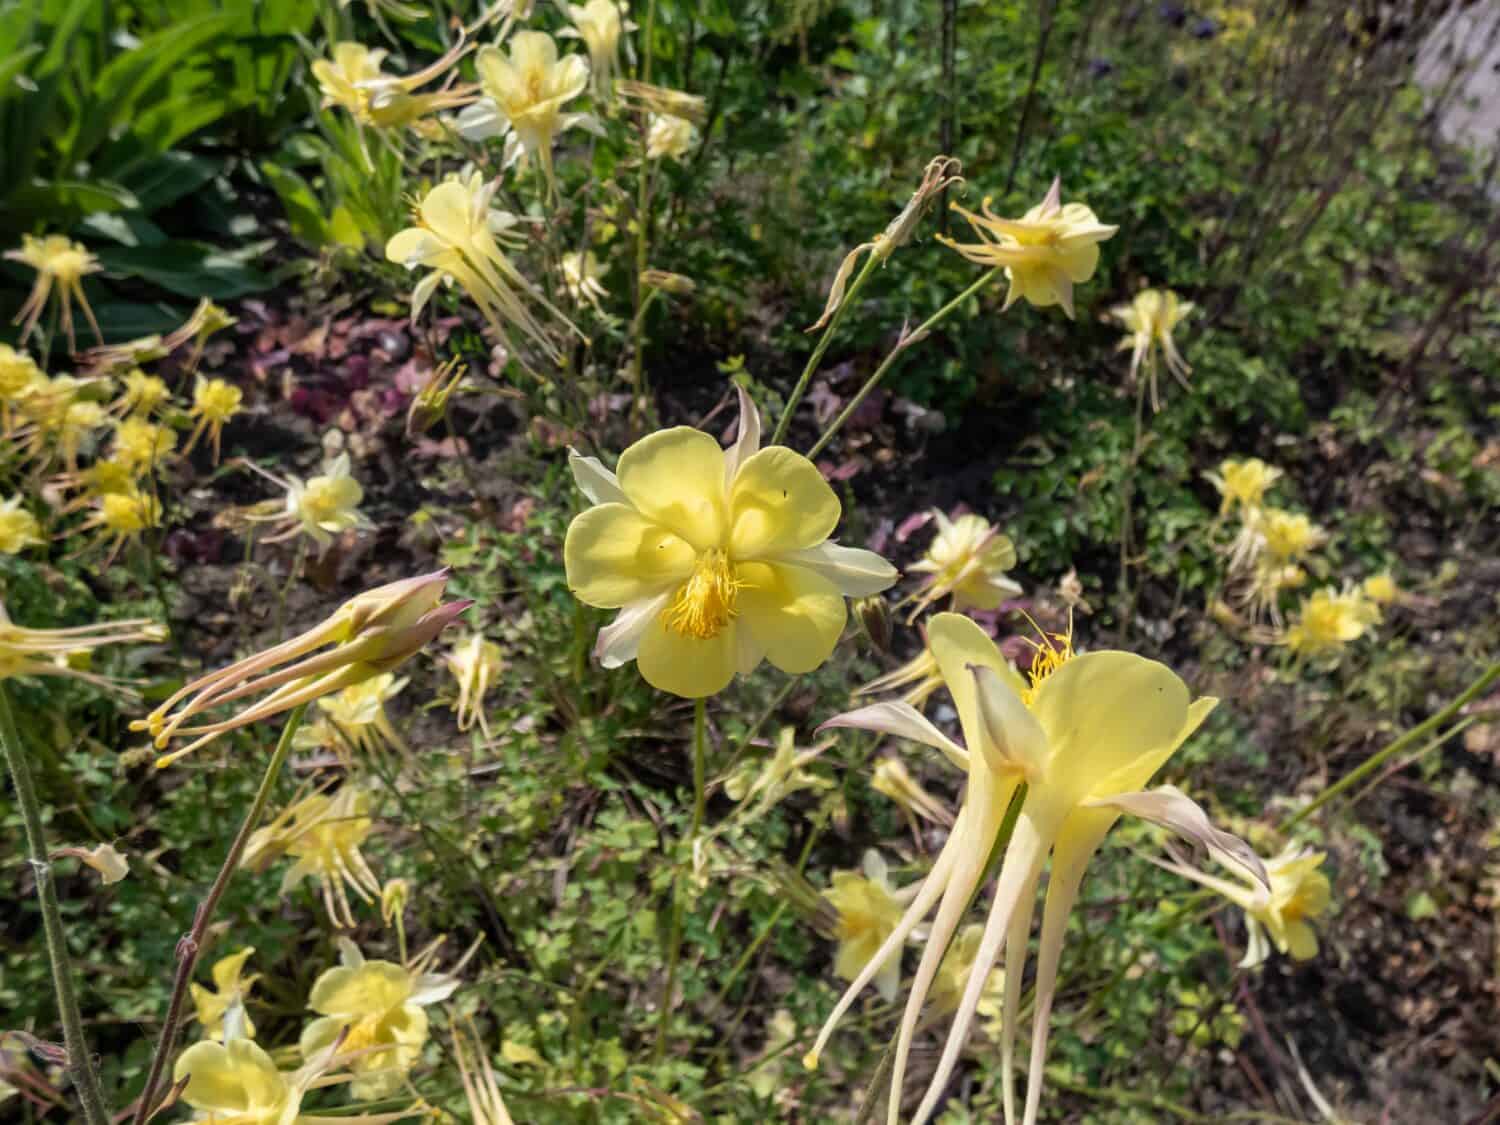 Aquilegia chrysantha 'Yellow Queen' (Golden Columbine) flowering with large bright golden yellow flowers with very long, outward curving spurs and a bouquet of yellow anthers